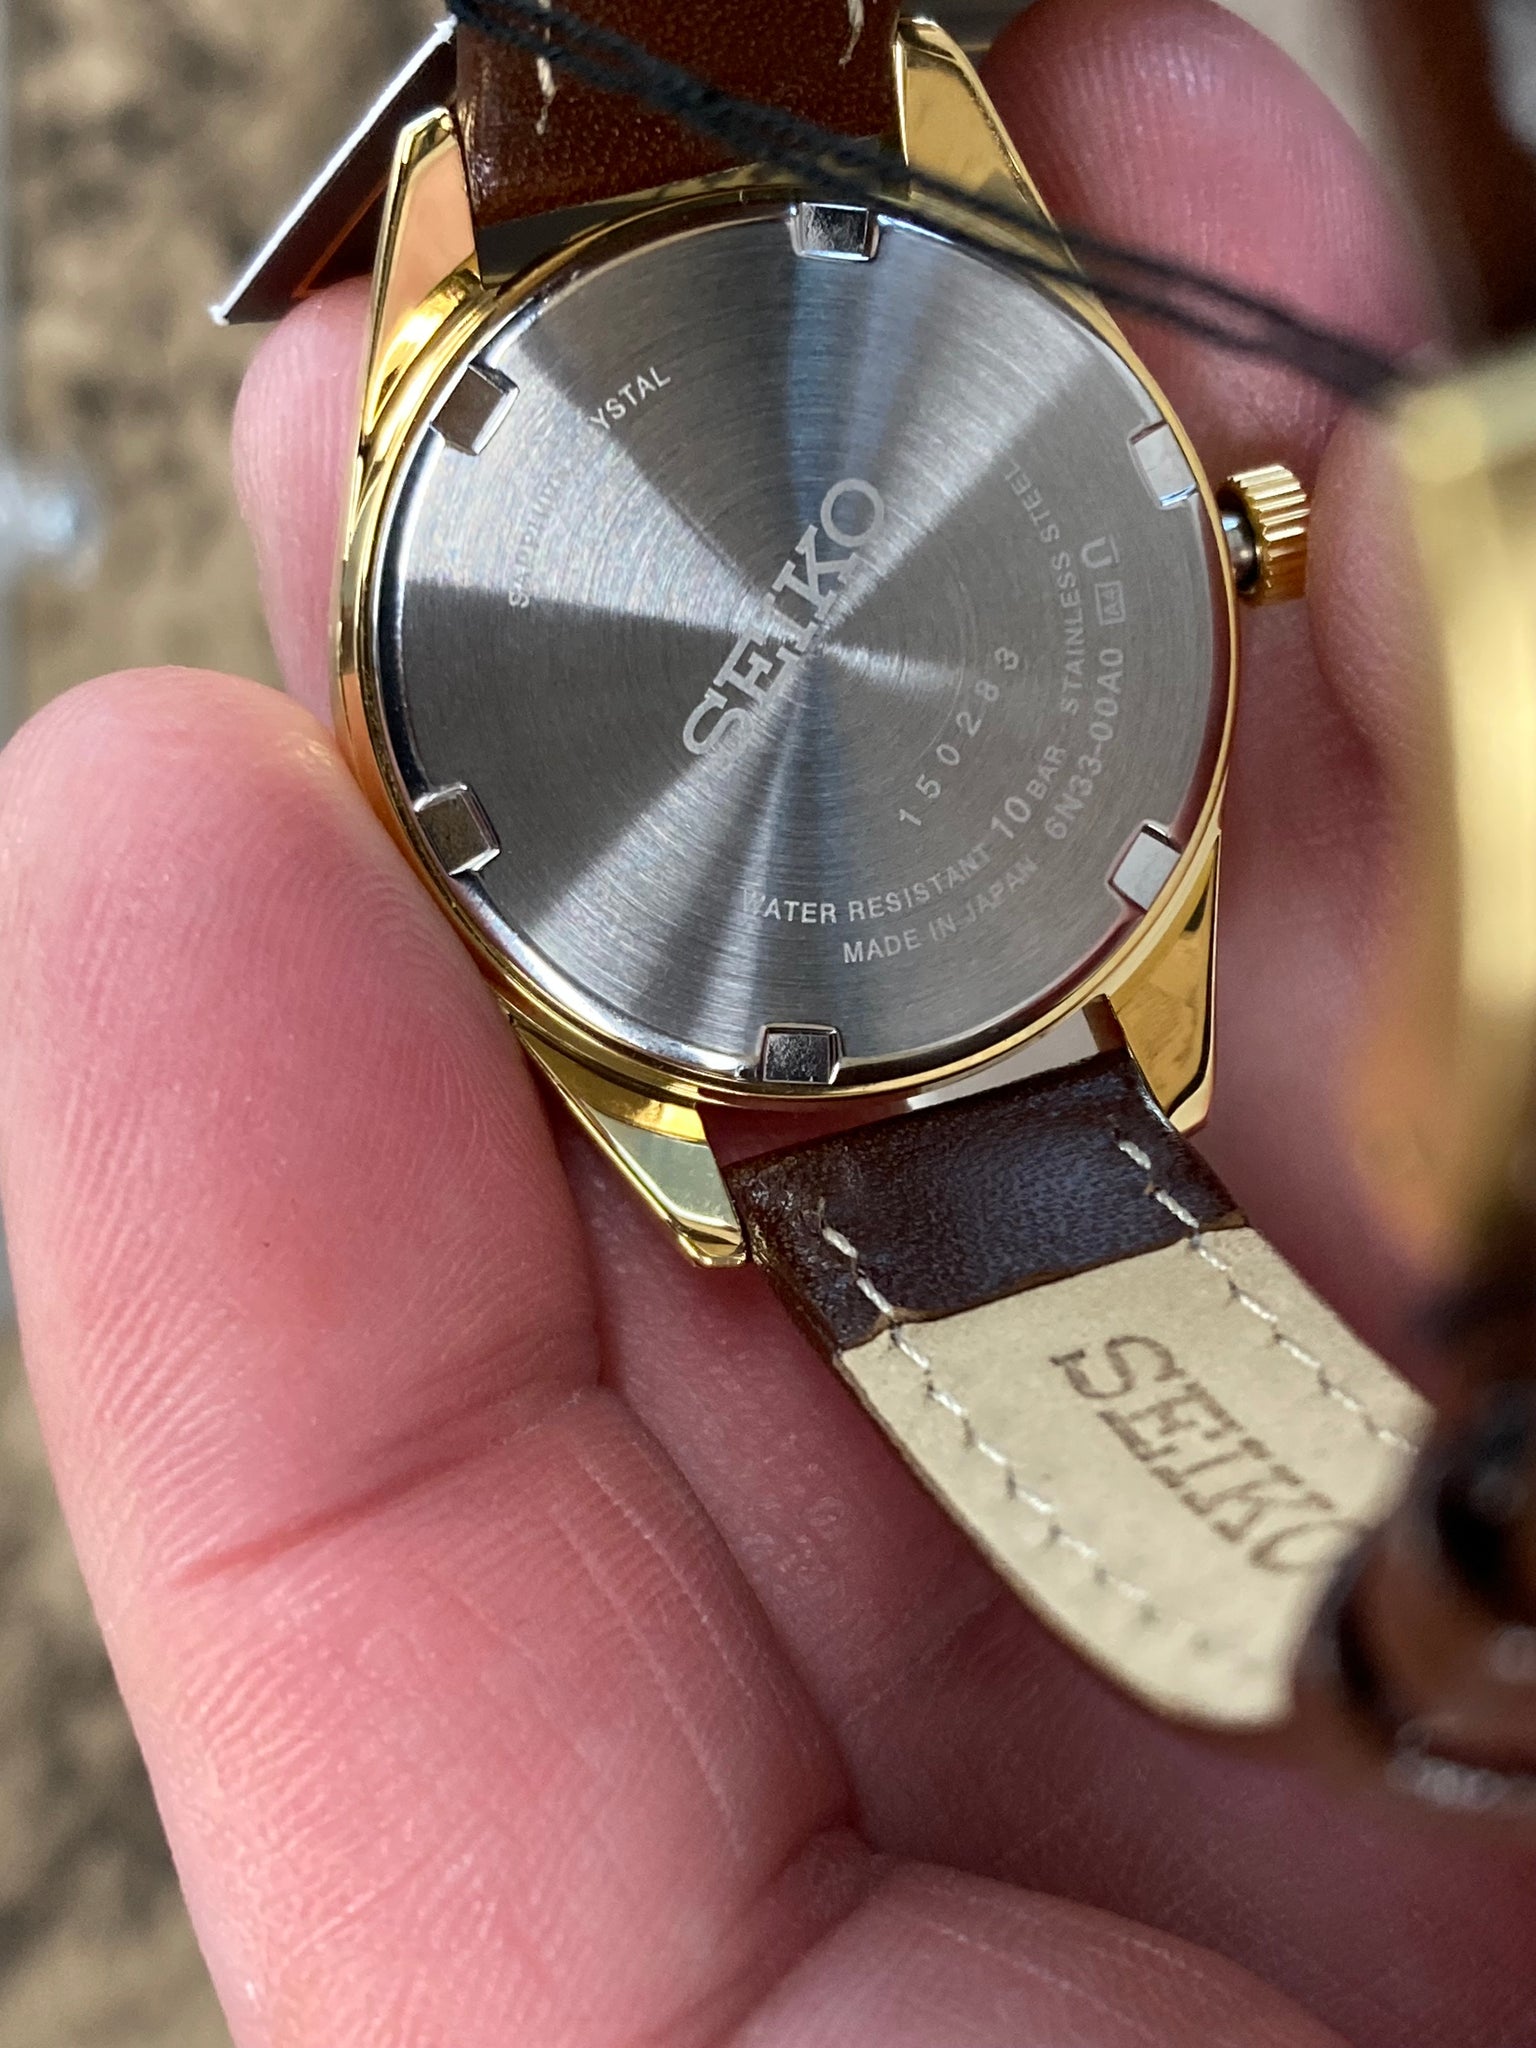 Seiko Women's Watch With Day And Date – DeGrandpre Jewelers